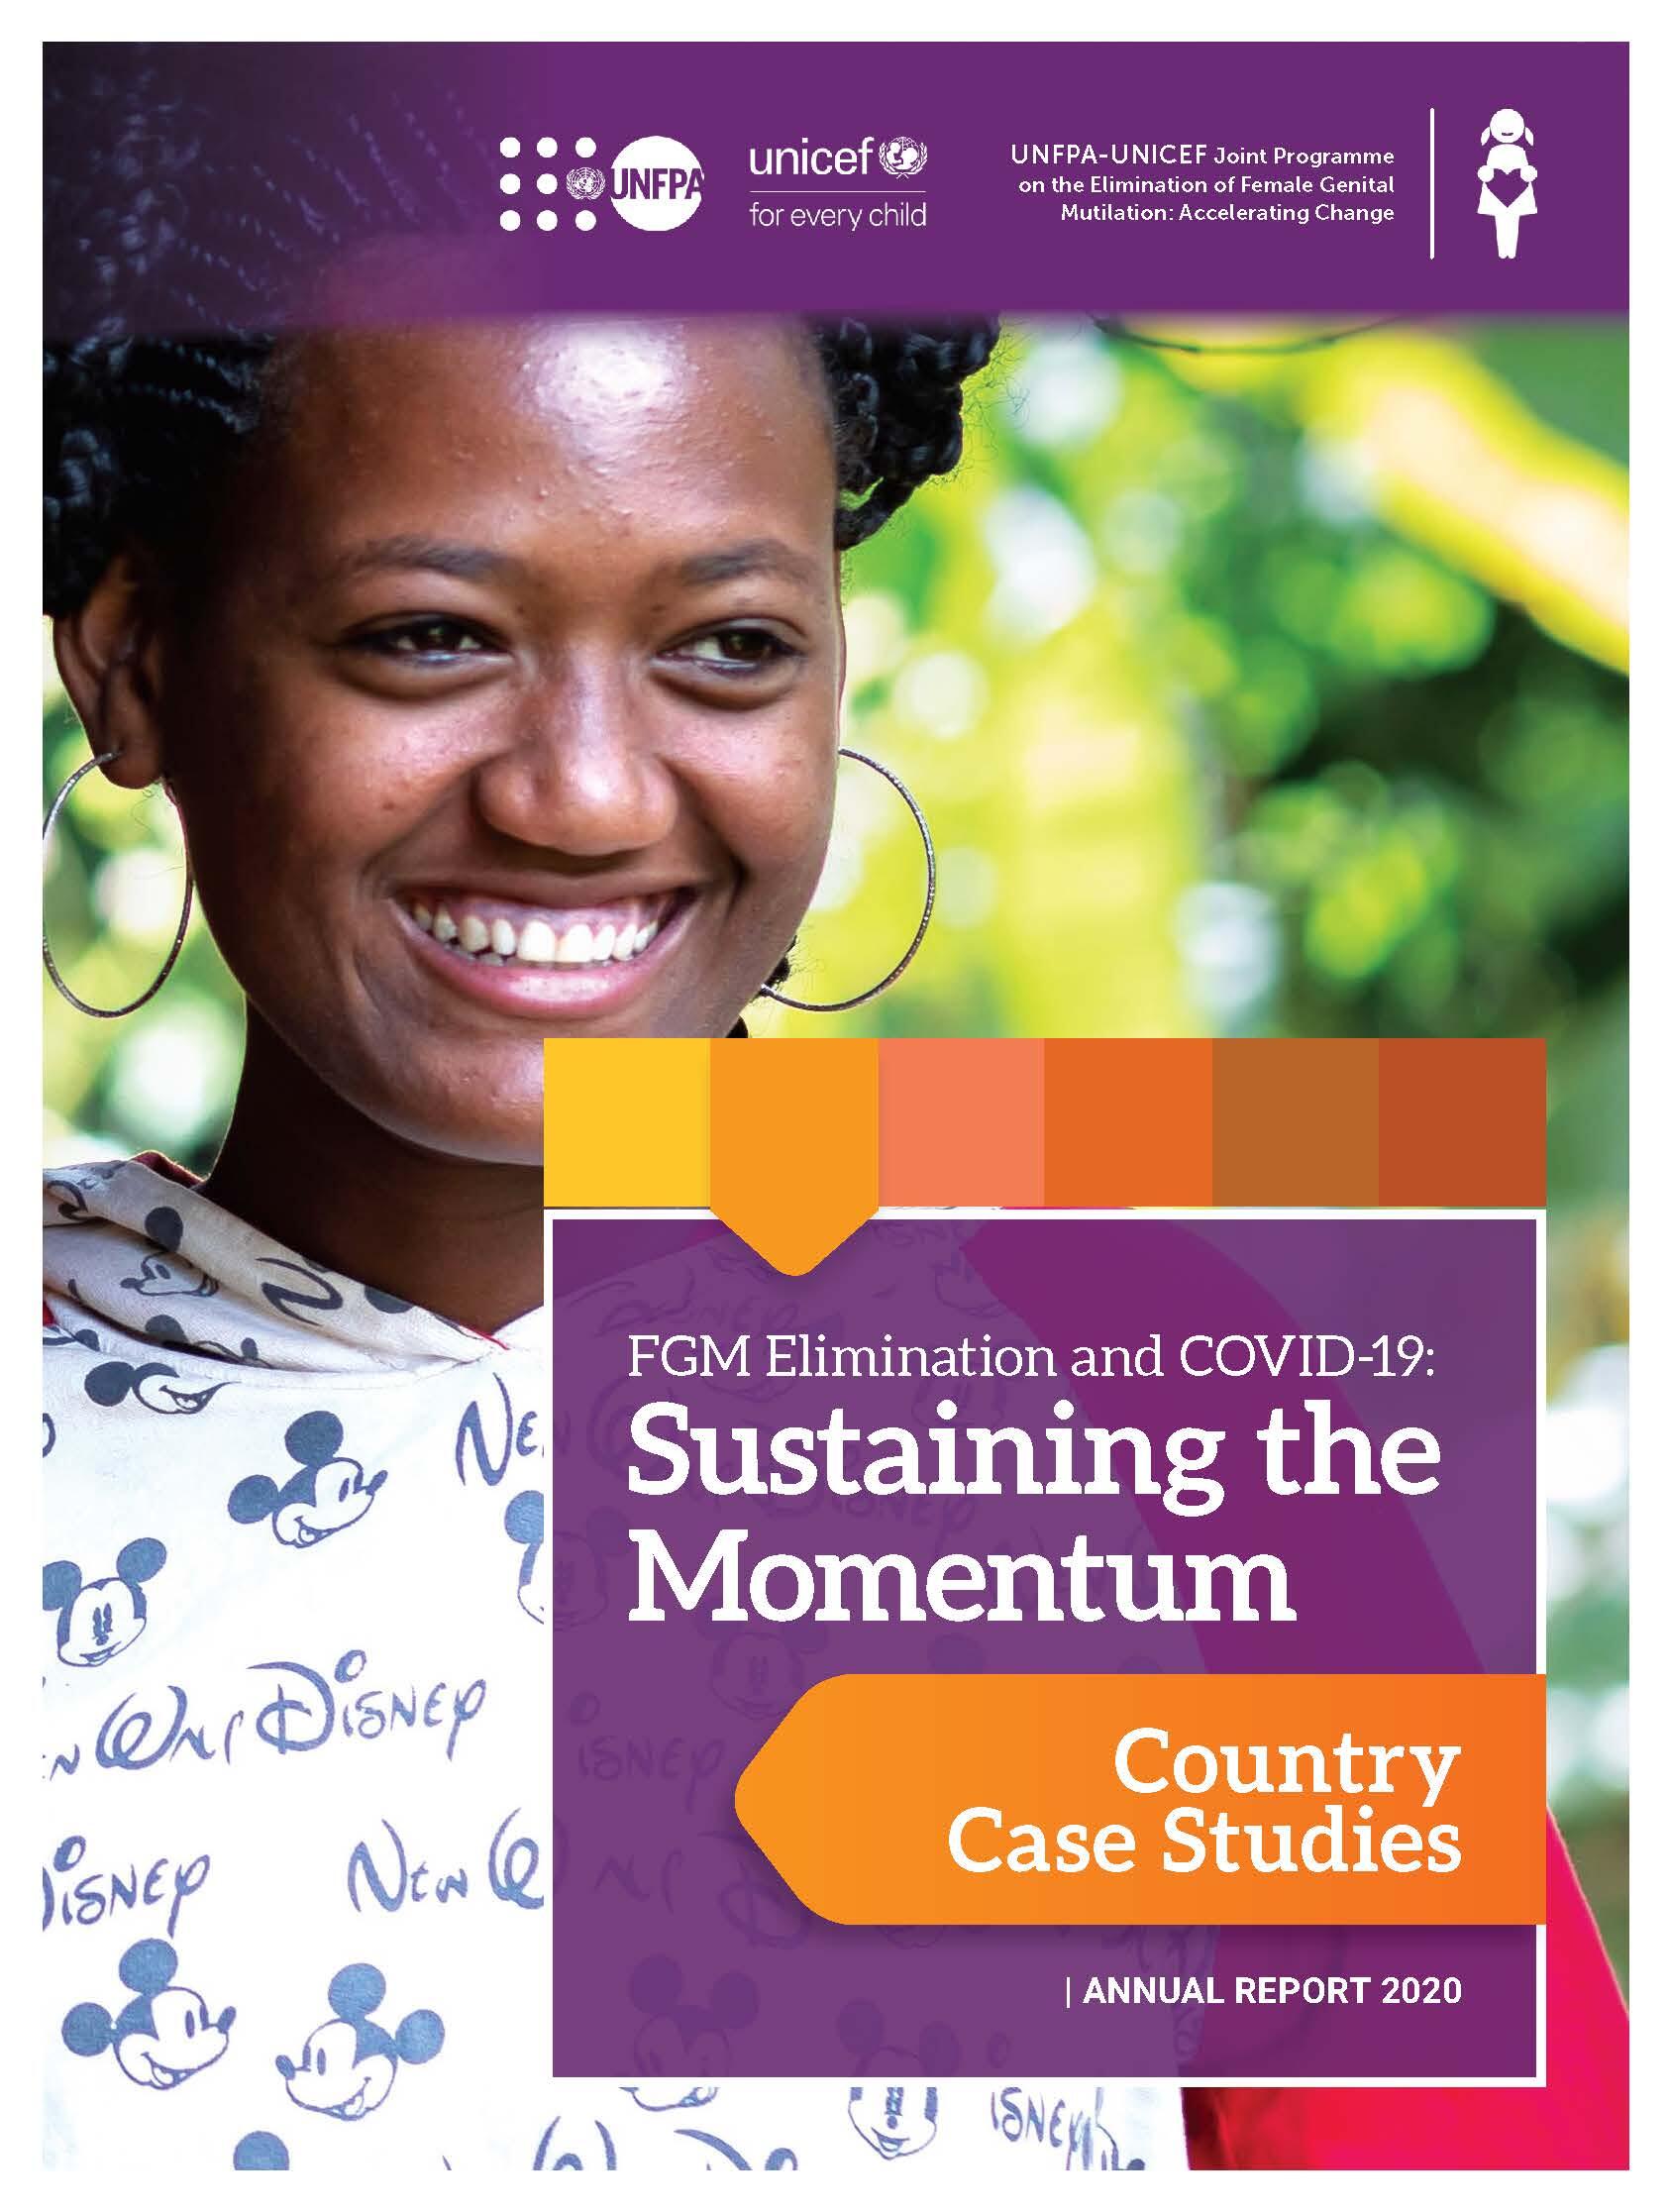 Woman smiling on FGM 2020 report cover